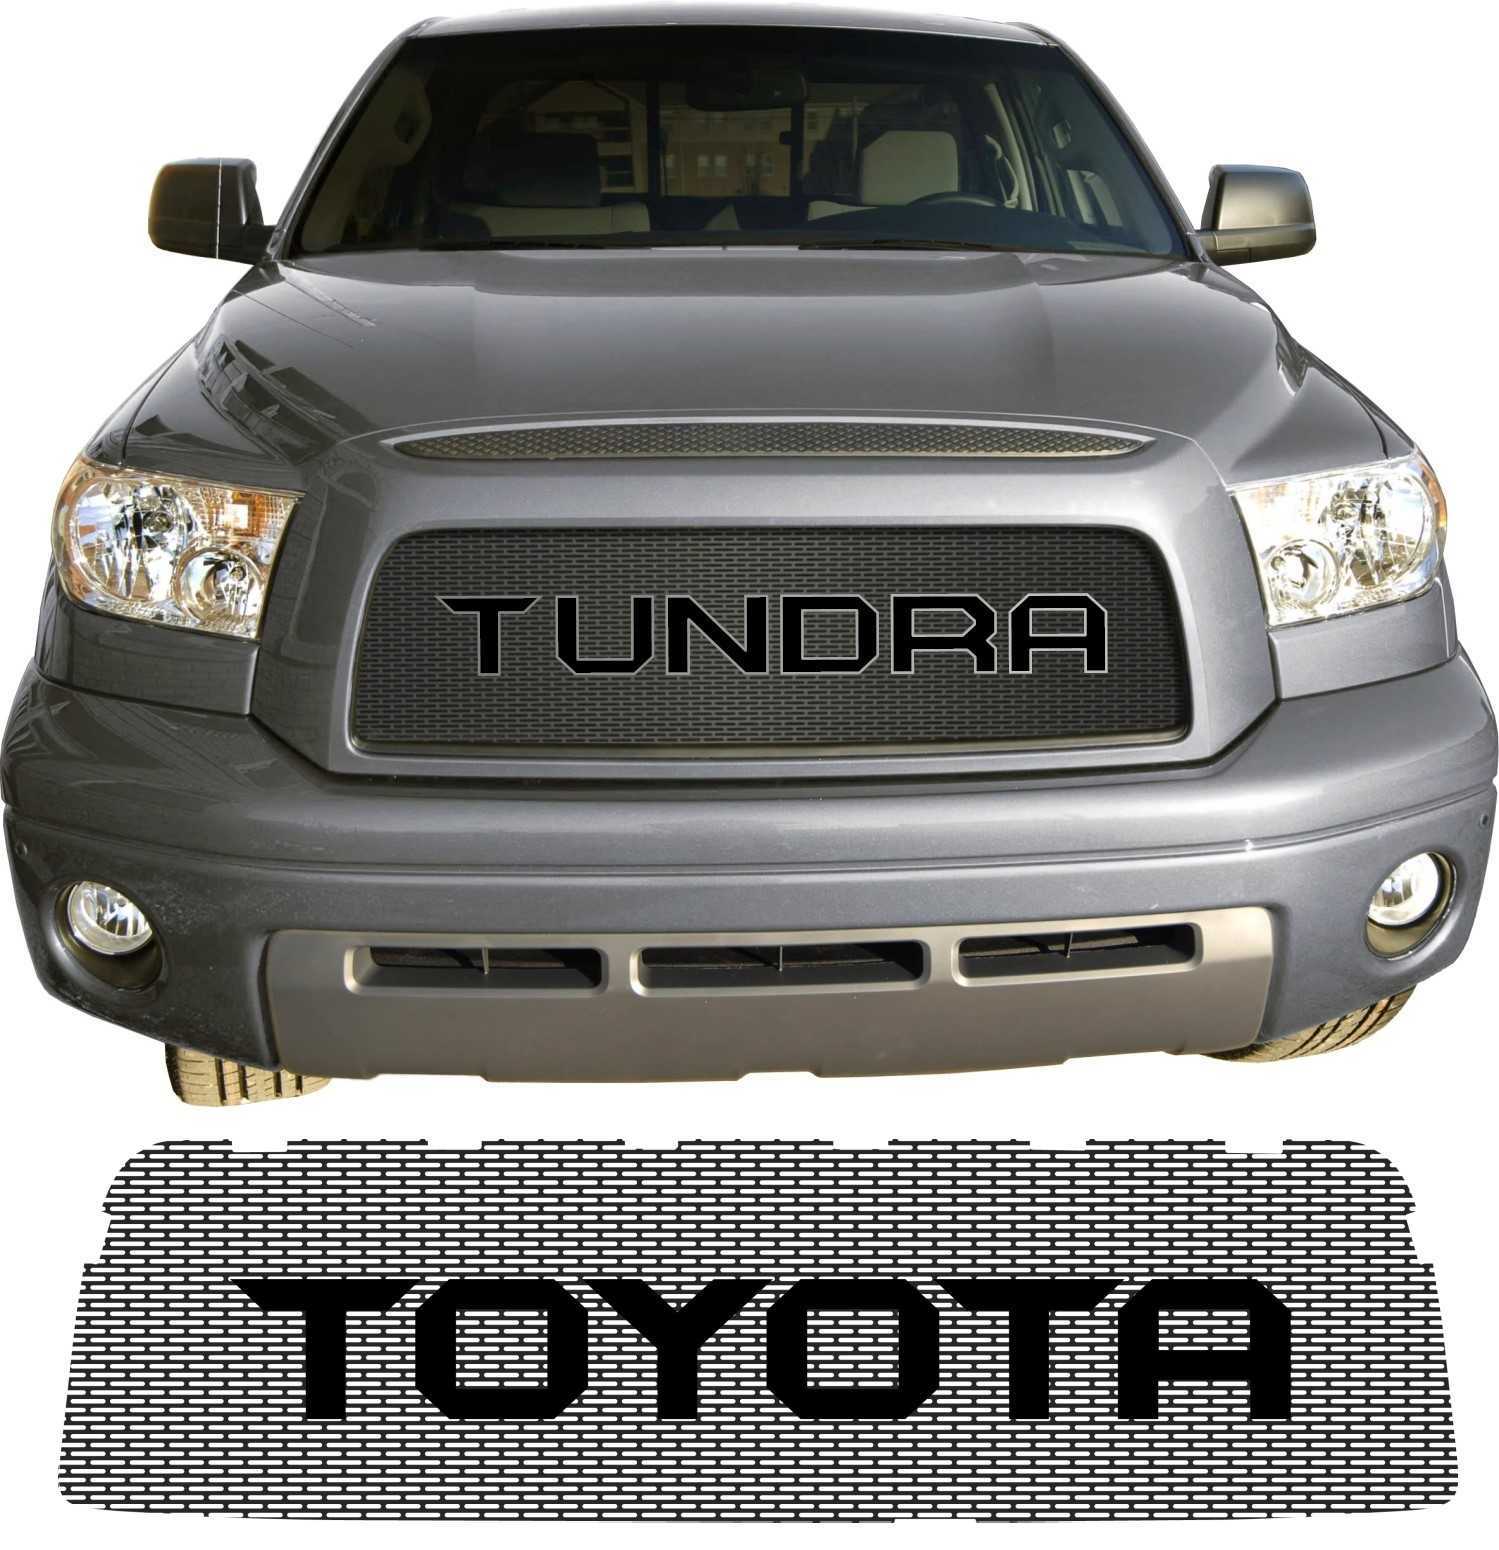 2007 - 2009 Toyota Tundra Grill Mesh with Big Letters #1